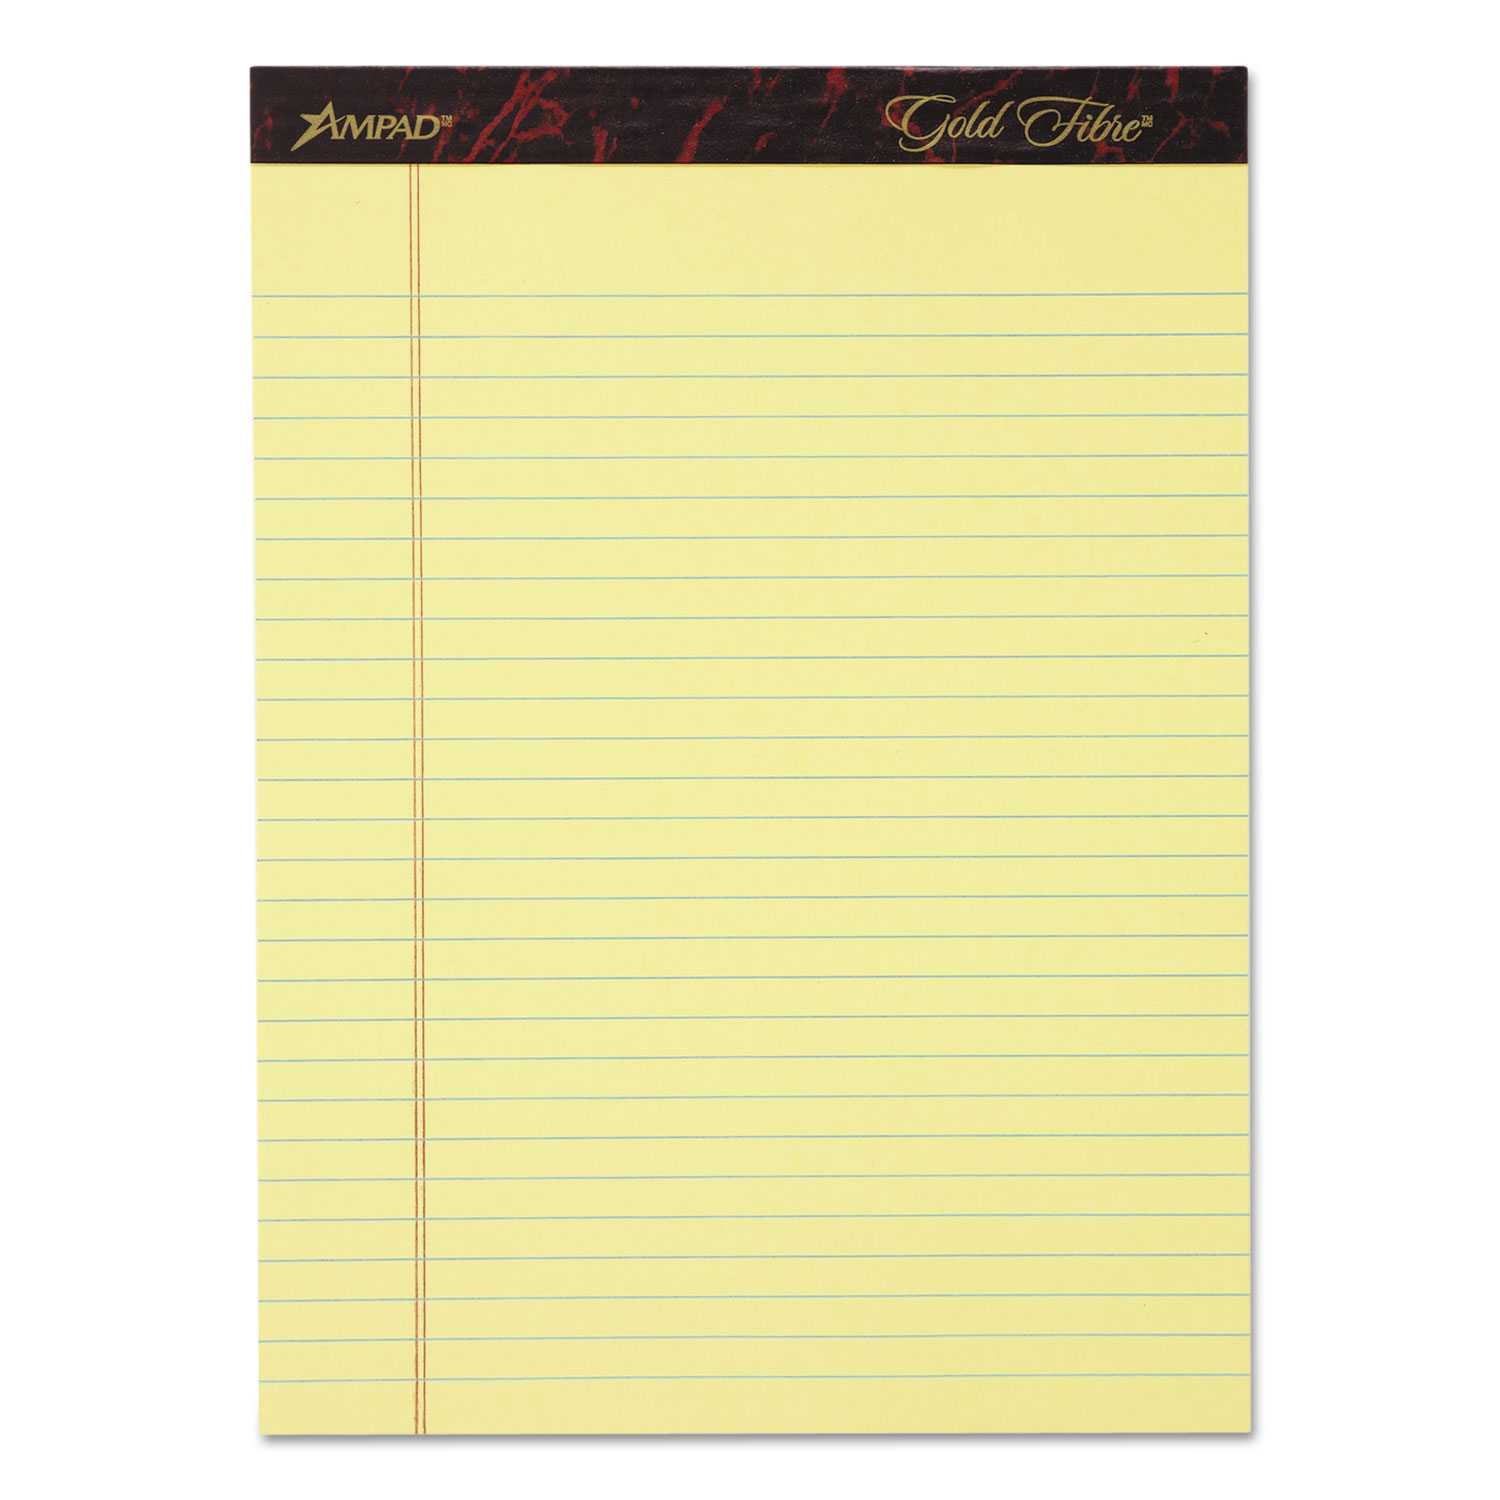  Ampad 20-032R Gold Fibre Writing Pads, Wide/Legal Rule, 8.5 x 11.75, Canary, 50 Sheets, 4/Pack (TOP20032) 